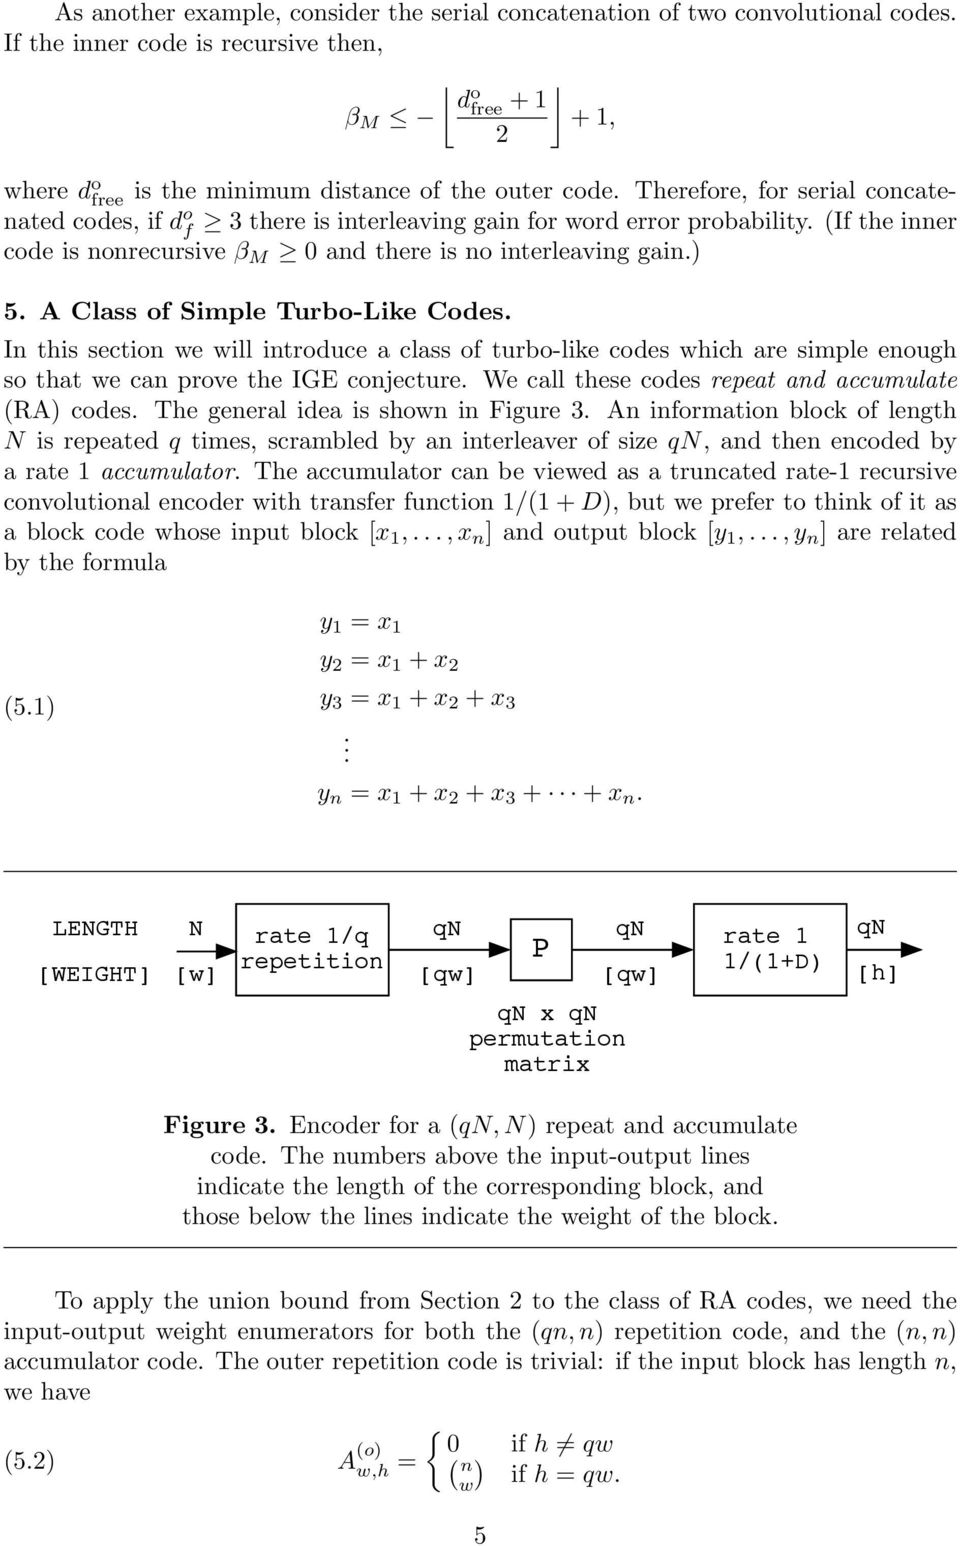 A Class of Simple Turbo-Like Codes. In this section we will introduce a class of turbo-like codes which are simple enough so that we can prove the IGE conjecture.